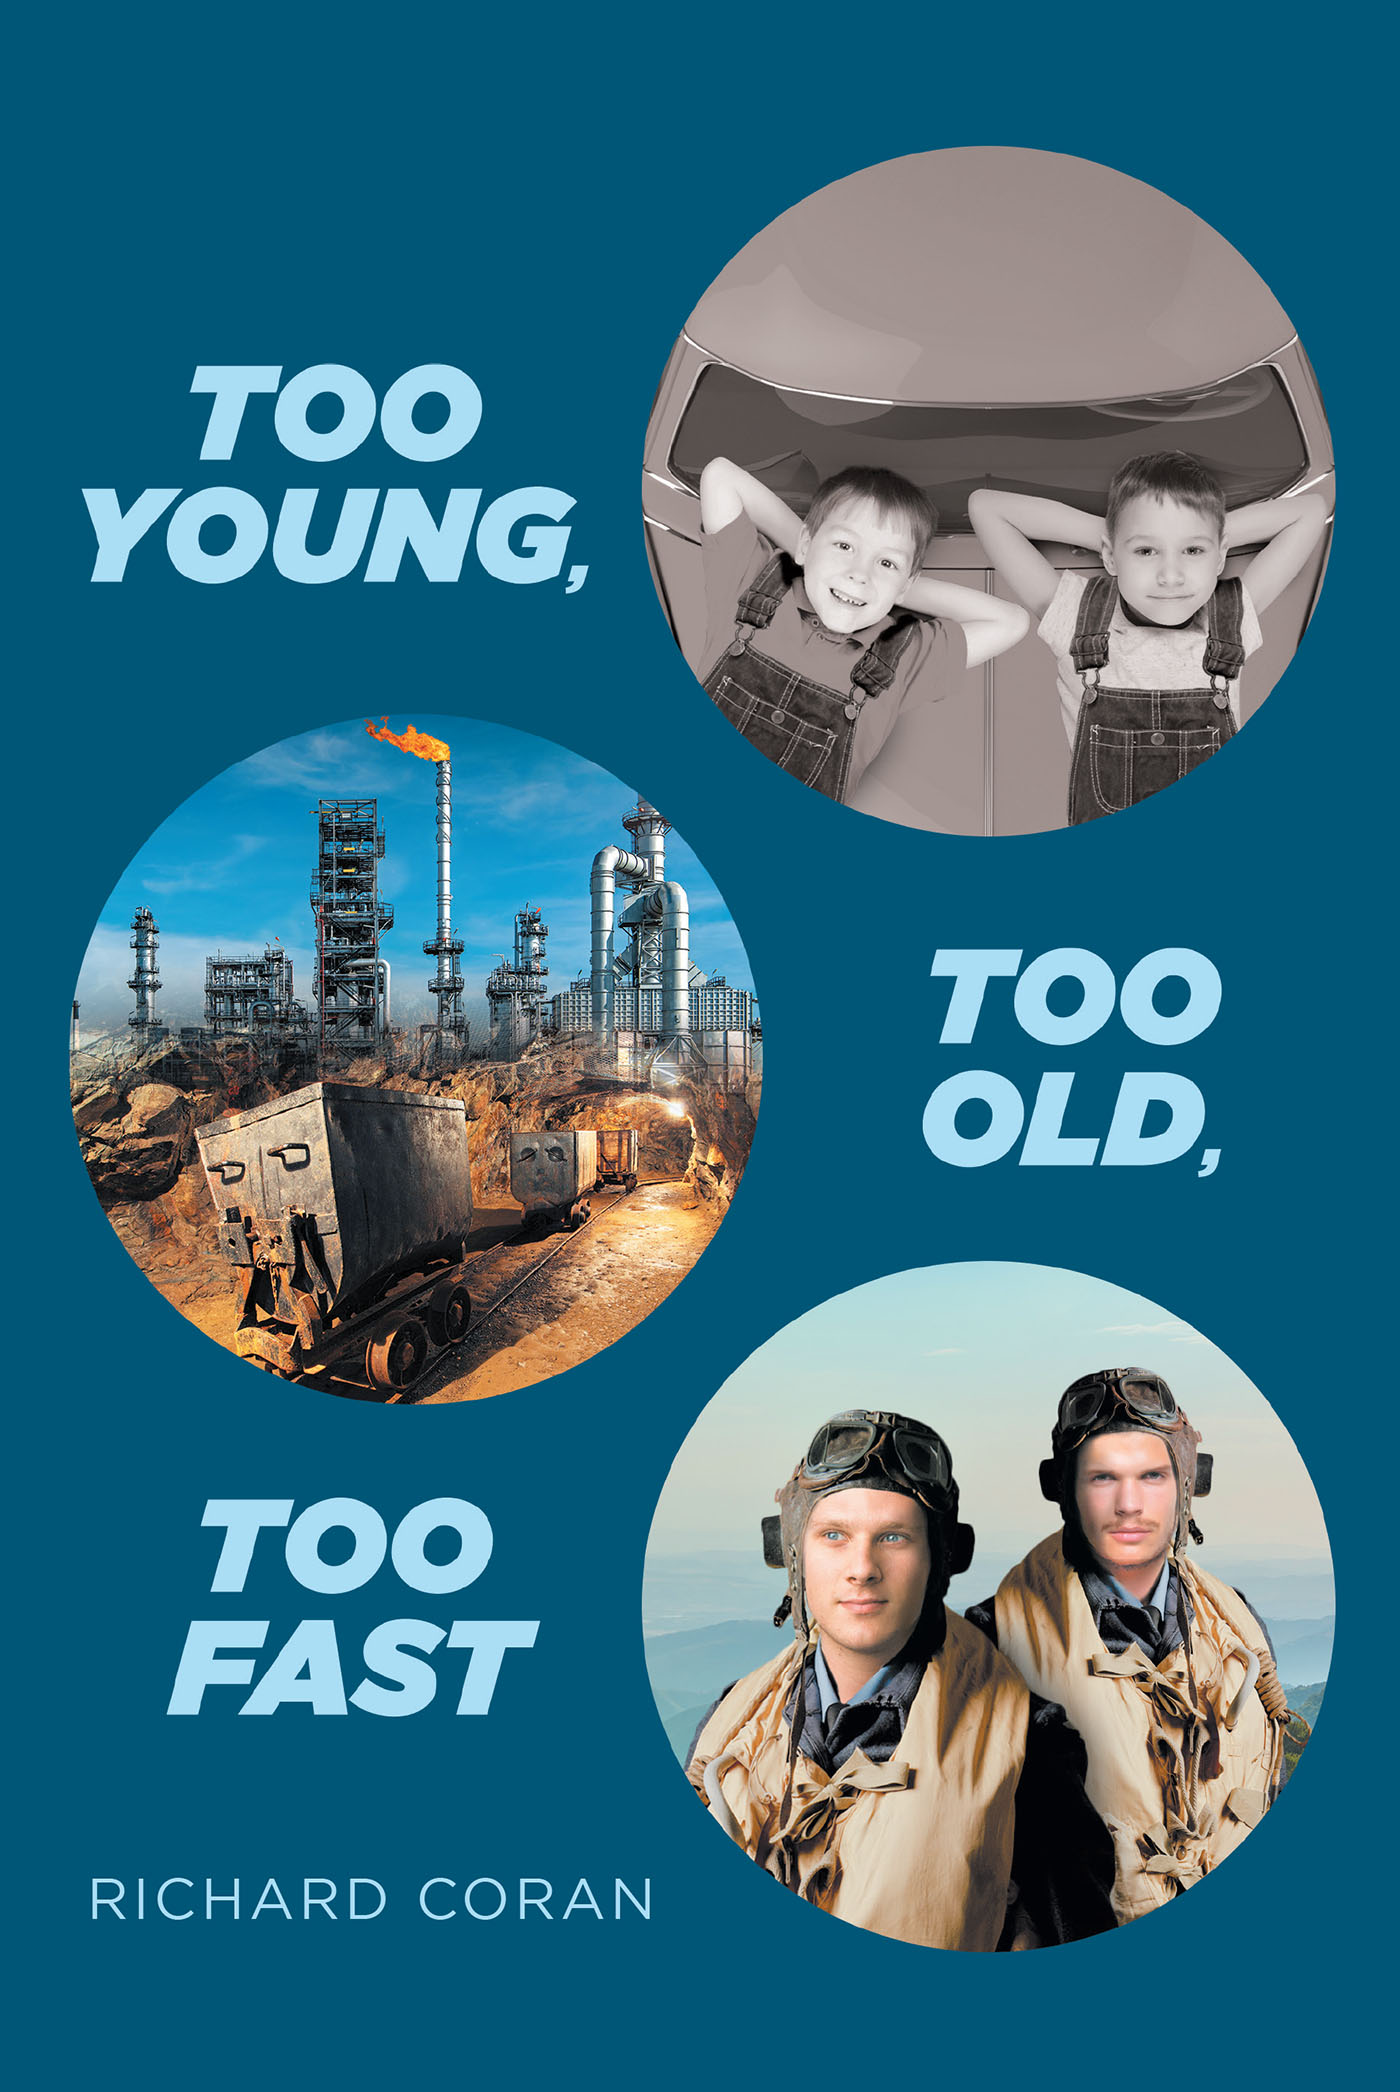 Richard Coran’s New Book, "Too Young, Too Old, Too Fast," is a Thought-Provoking and Intense Novel That Follows the Story of Two Boys Who Have Dreams to Fulfill